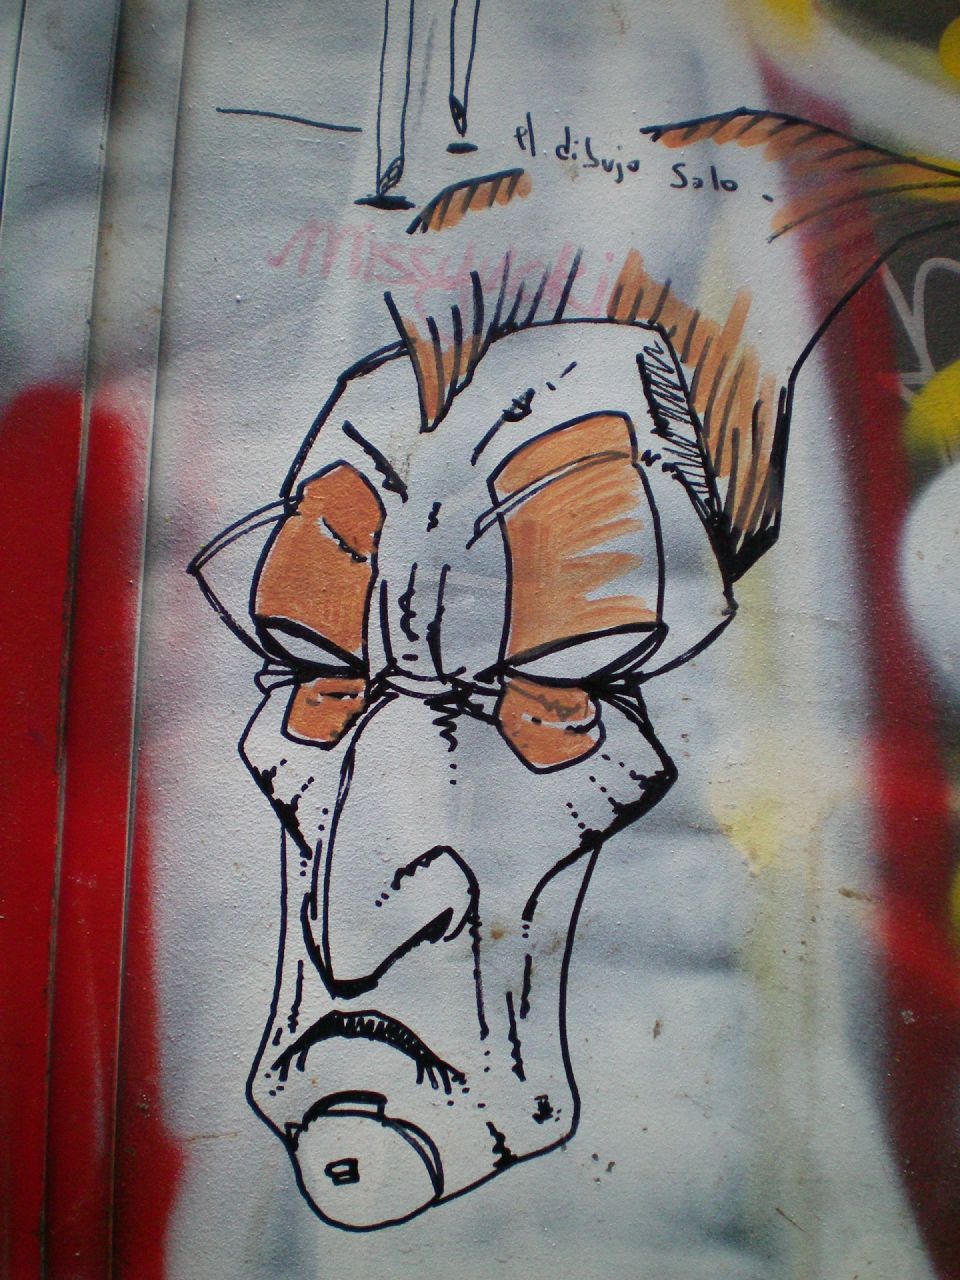 a graffiti wall with the face of a man's head and a large feather